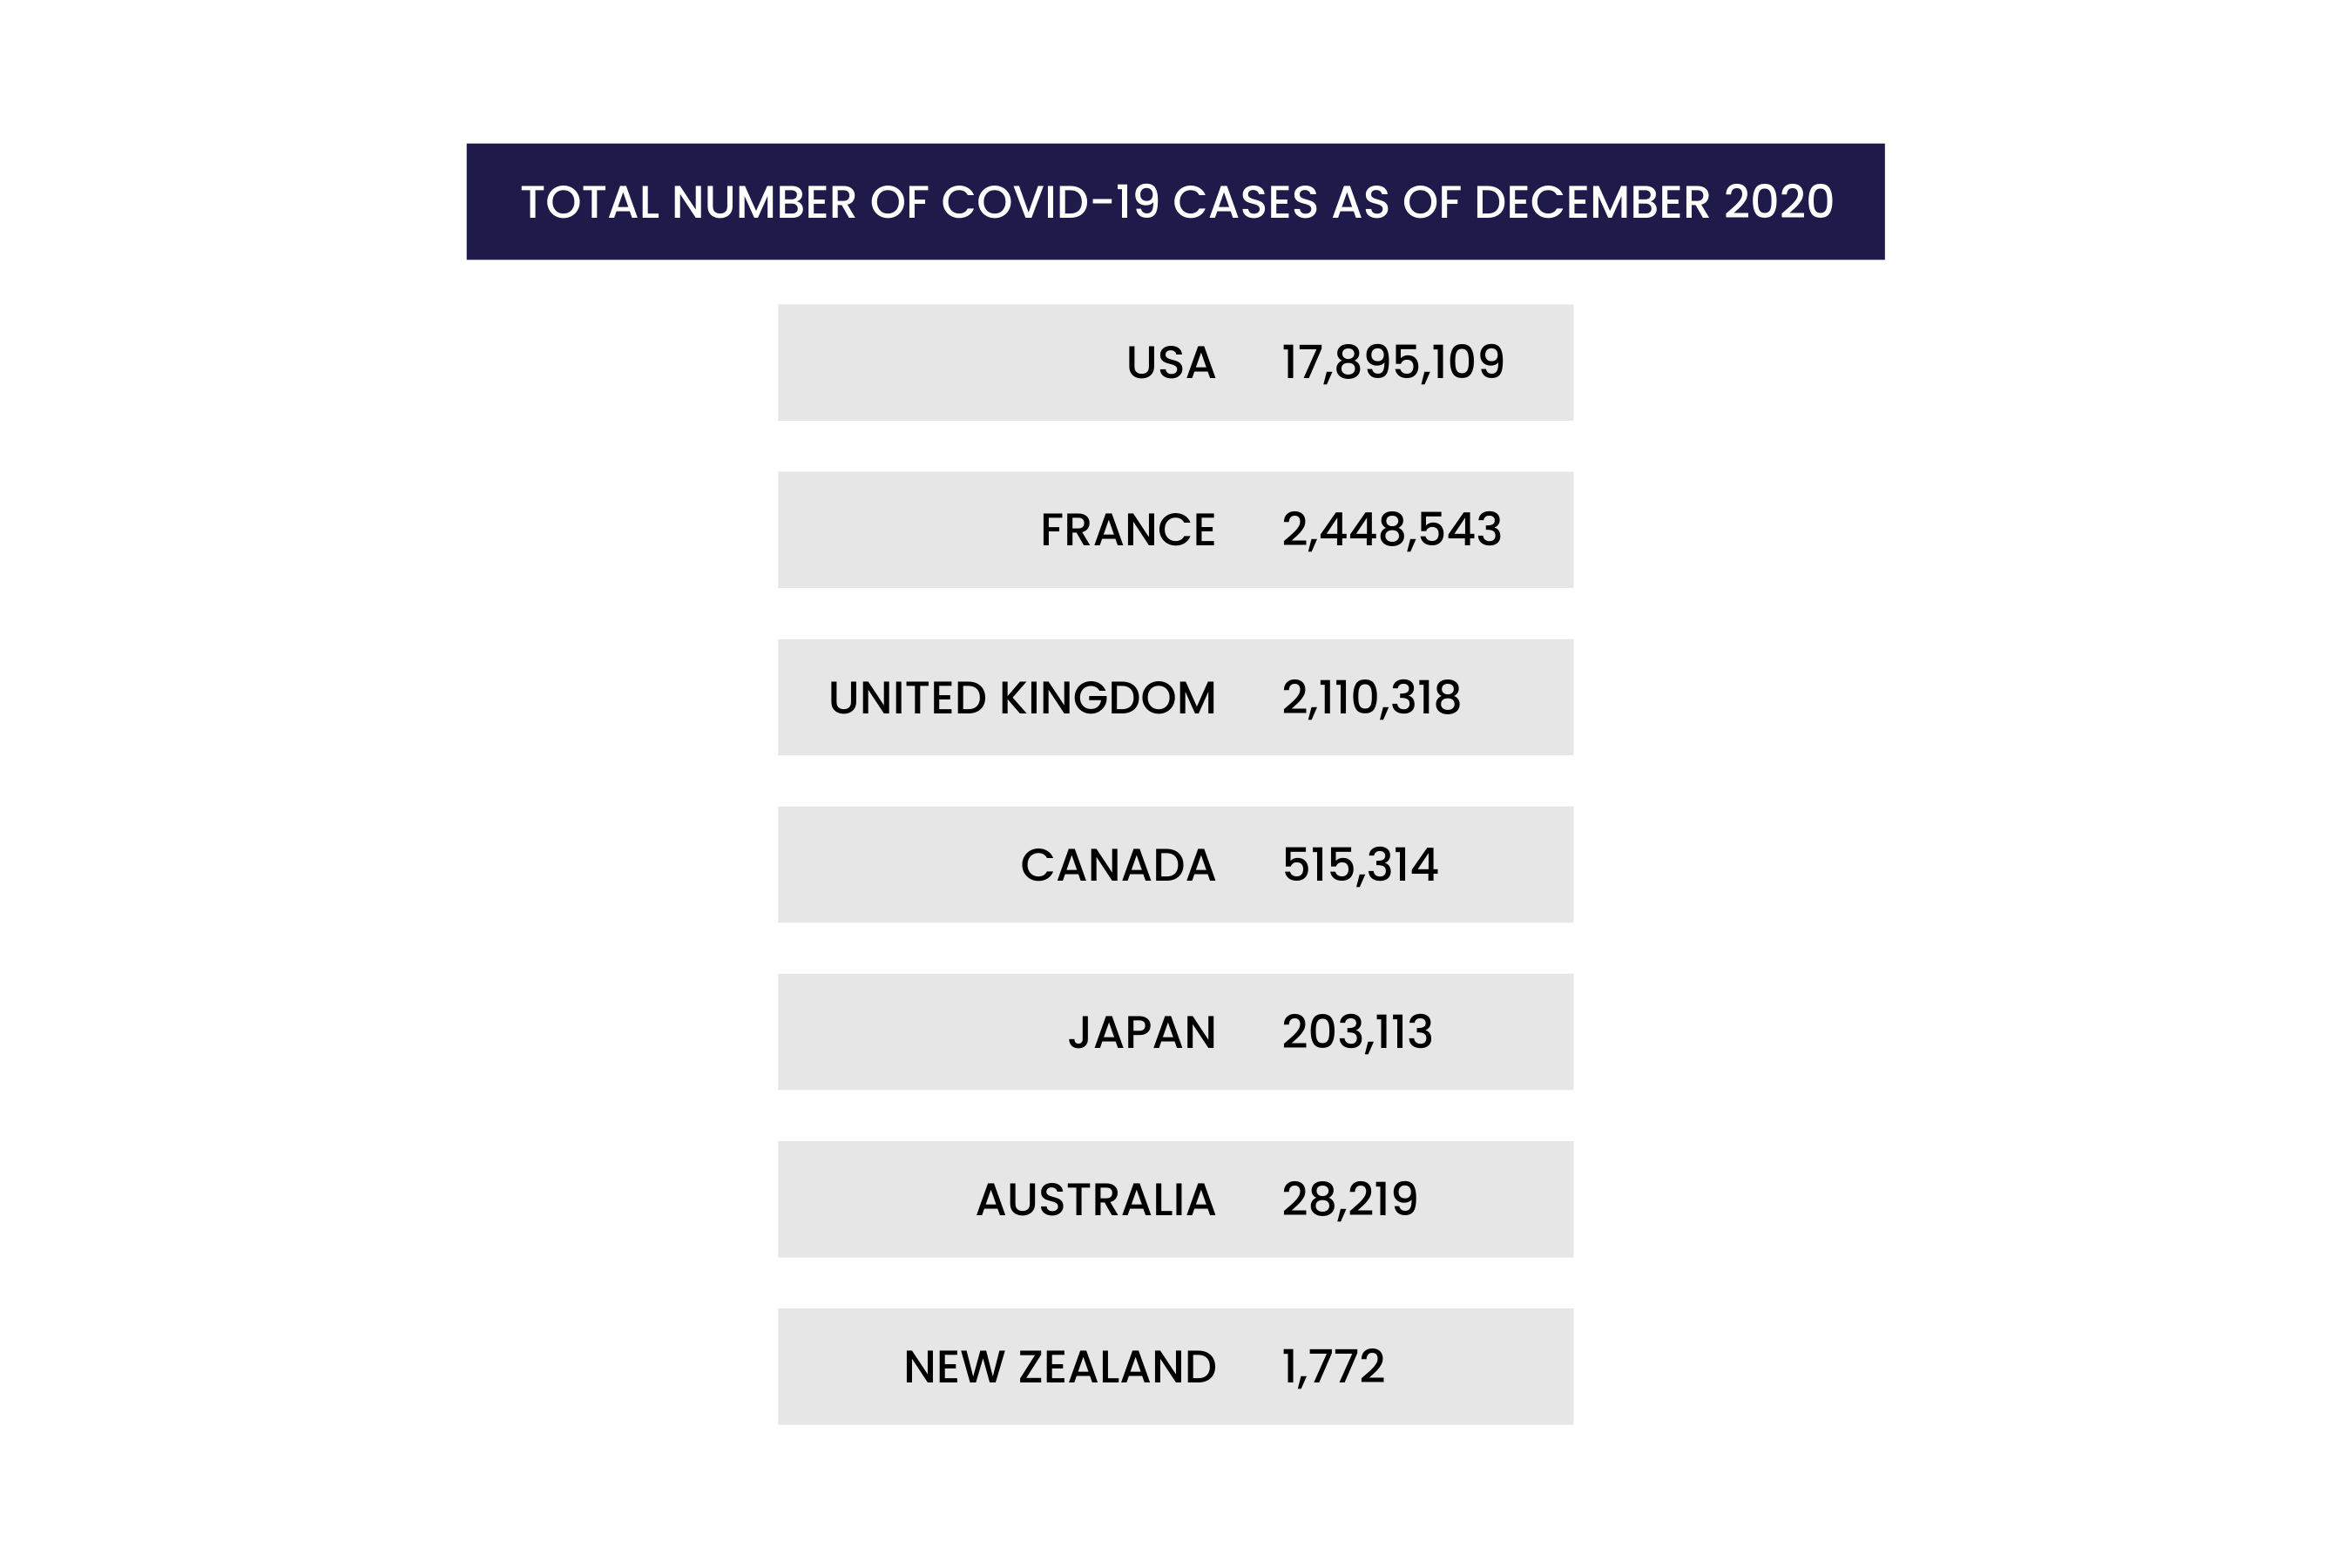 TOTAL NUMBER OF COVID-19 CASES AS OF DECEMBER 2020